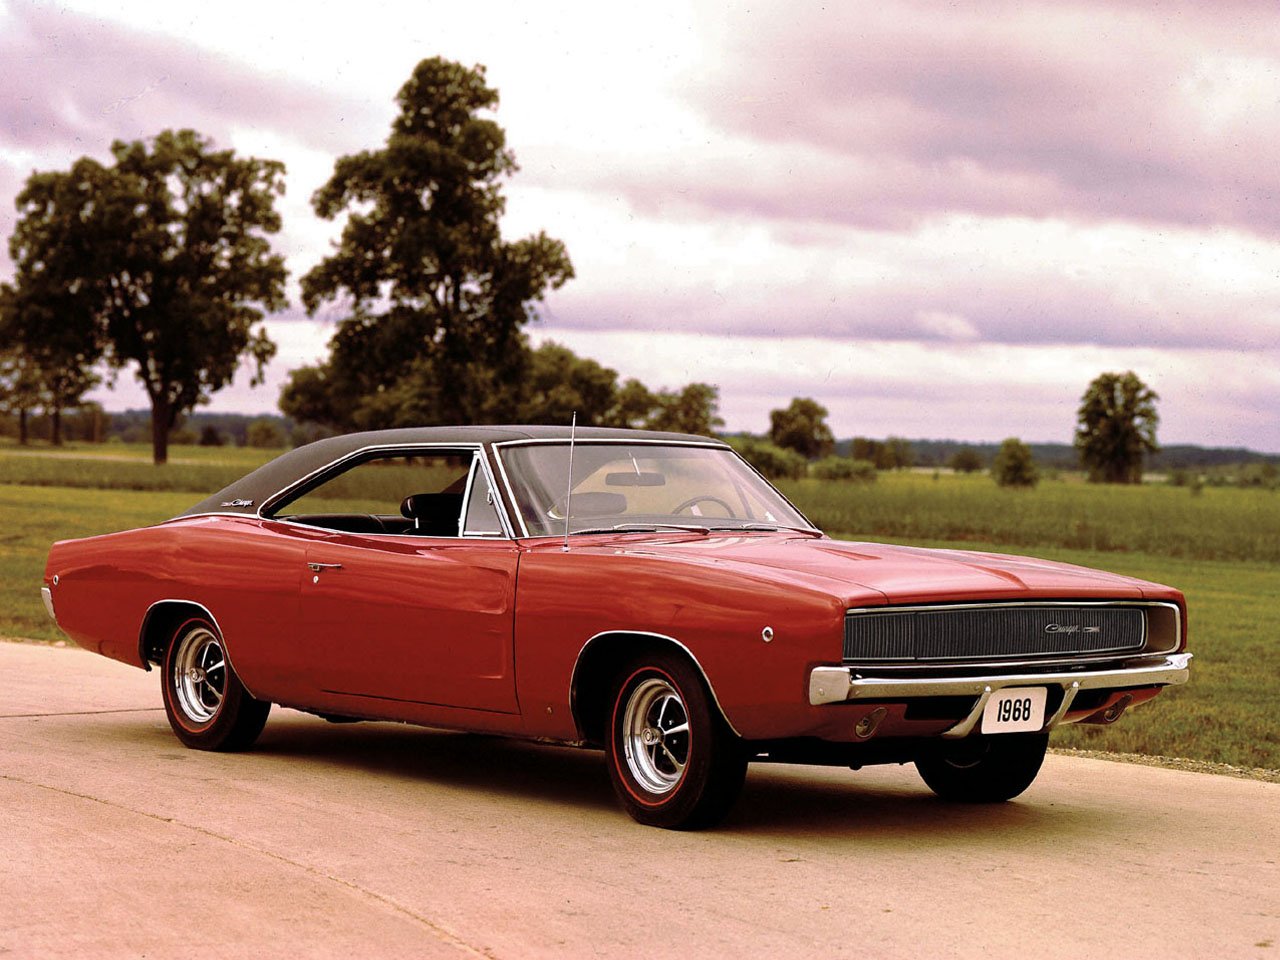 Dodge Charger wallpapers Dodge Charger pictures